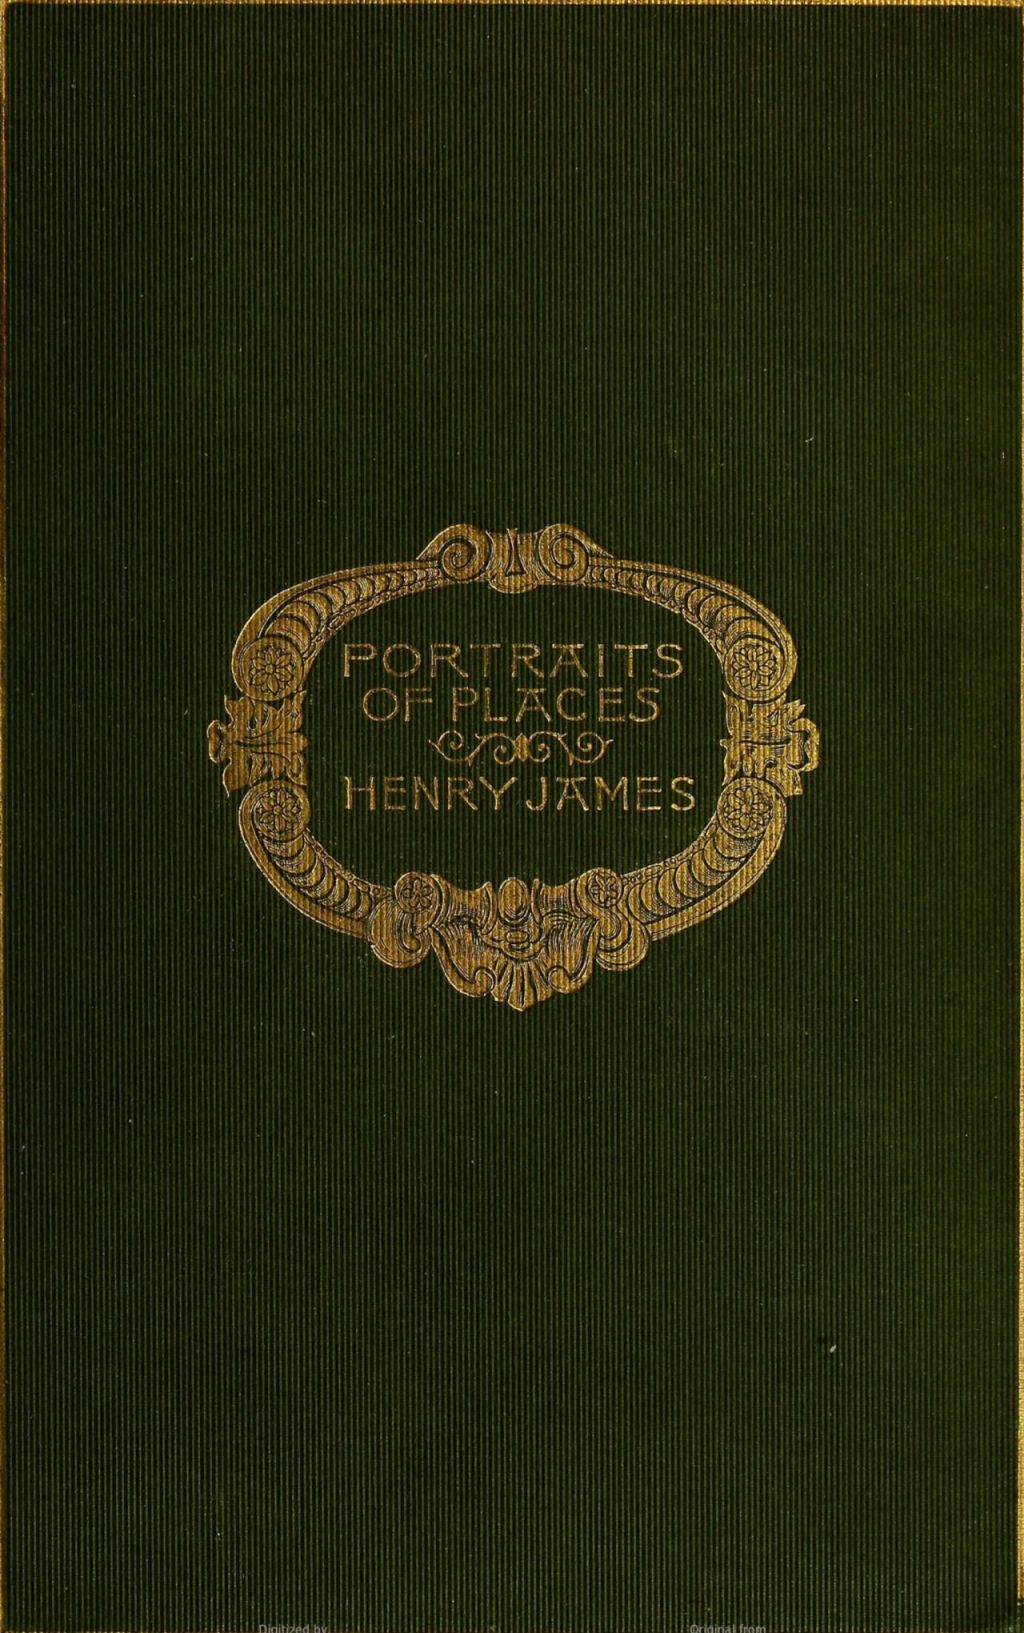 The Project Gutenberg eBook of Portraits of places, by Henry James. photo